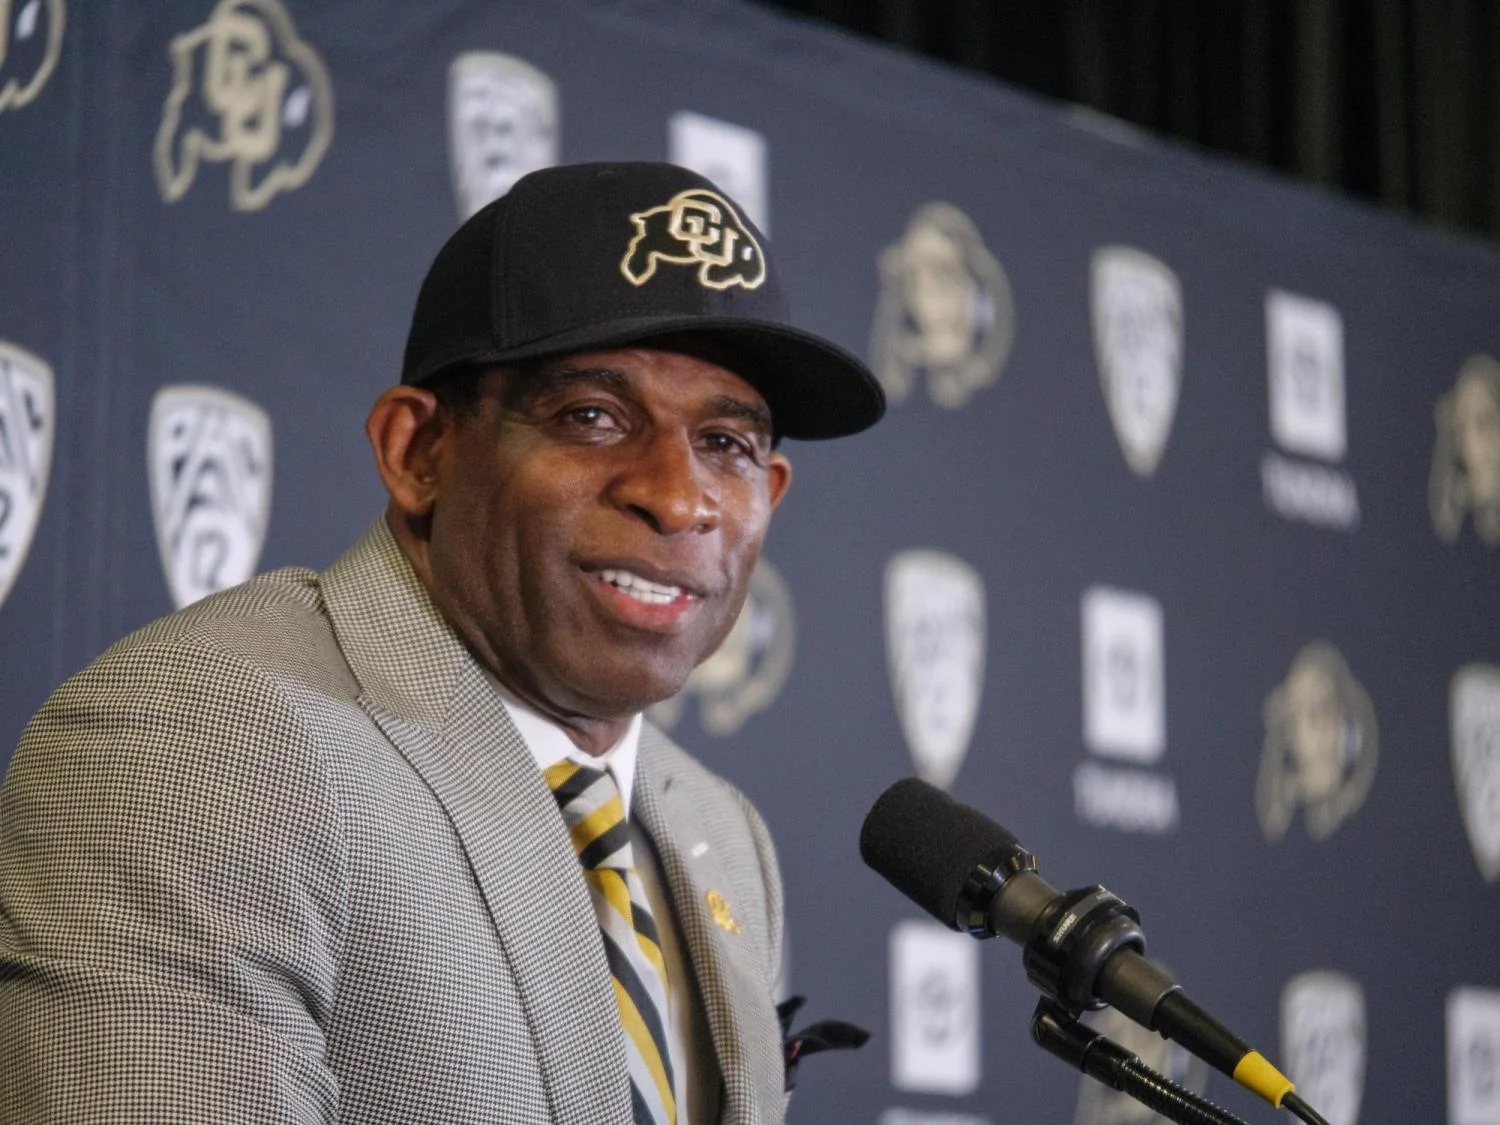 Perspective: Deion Sanders will bring life back to Colorado football